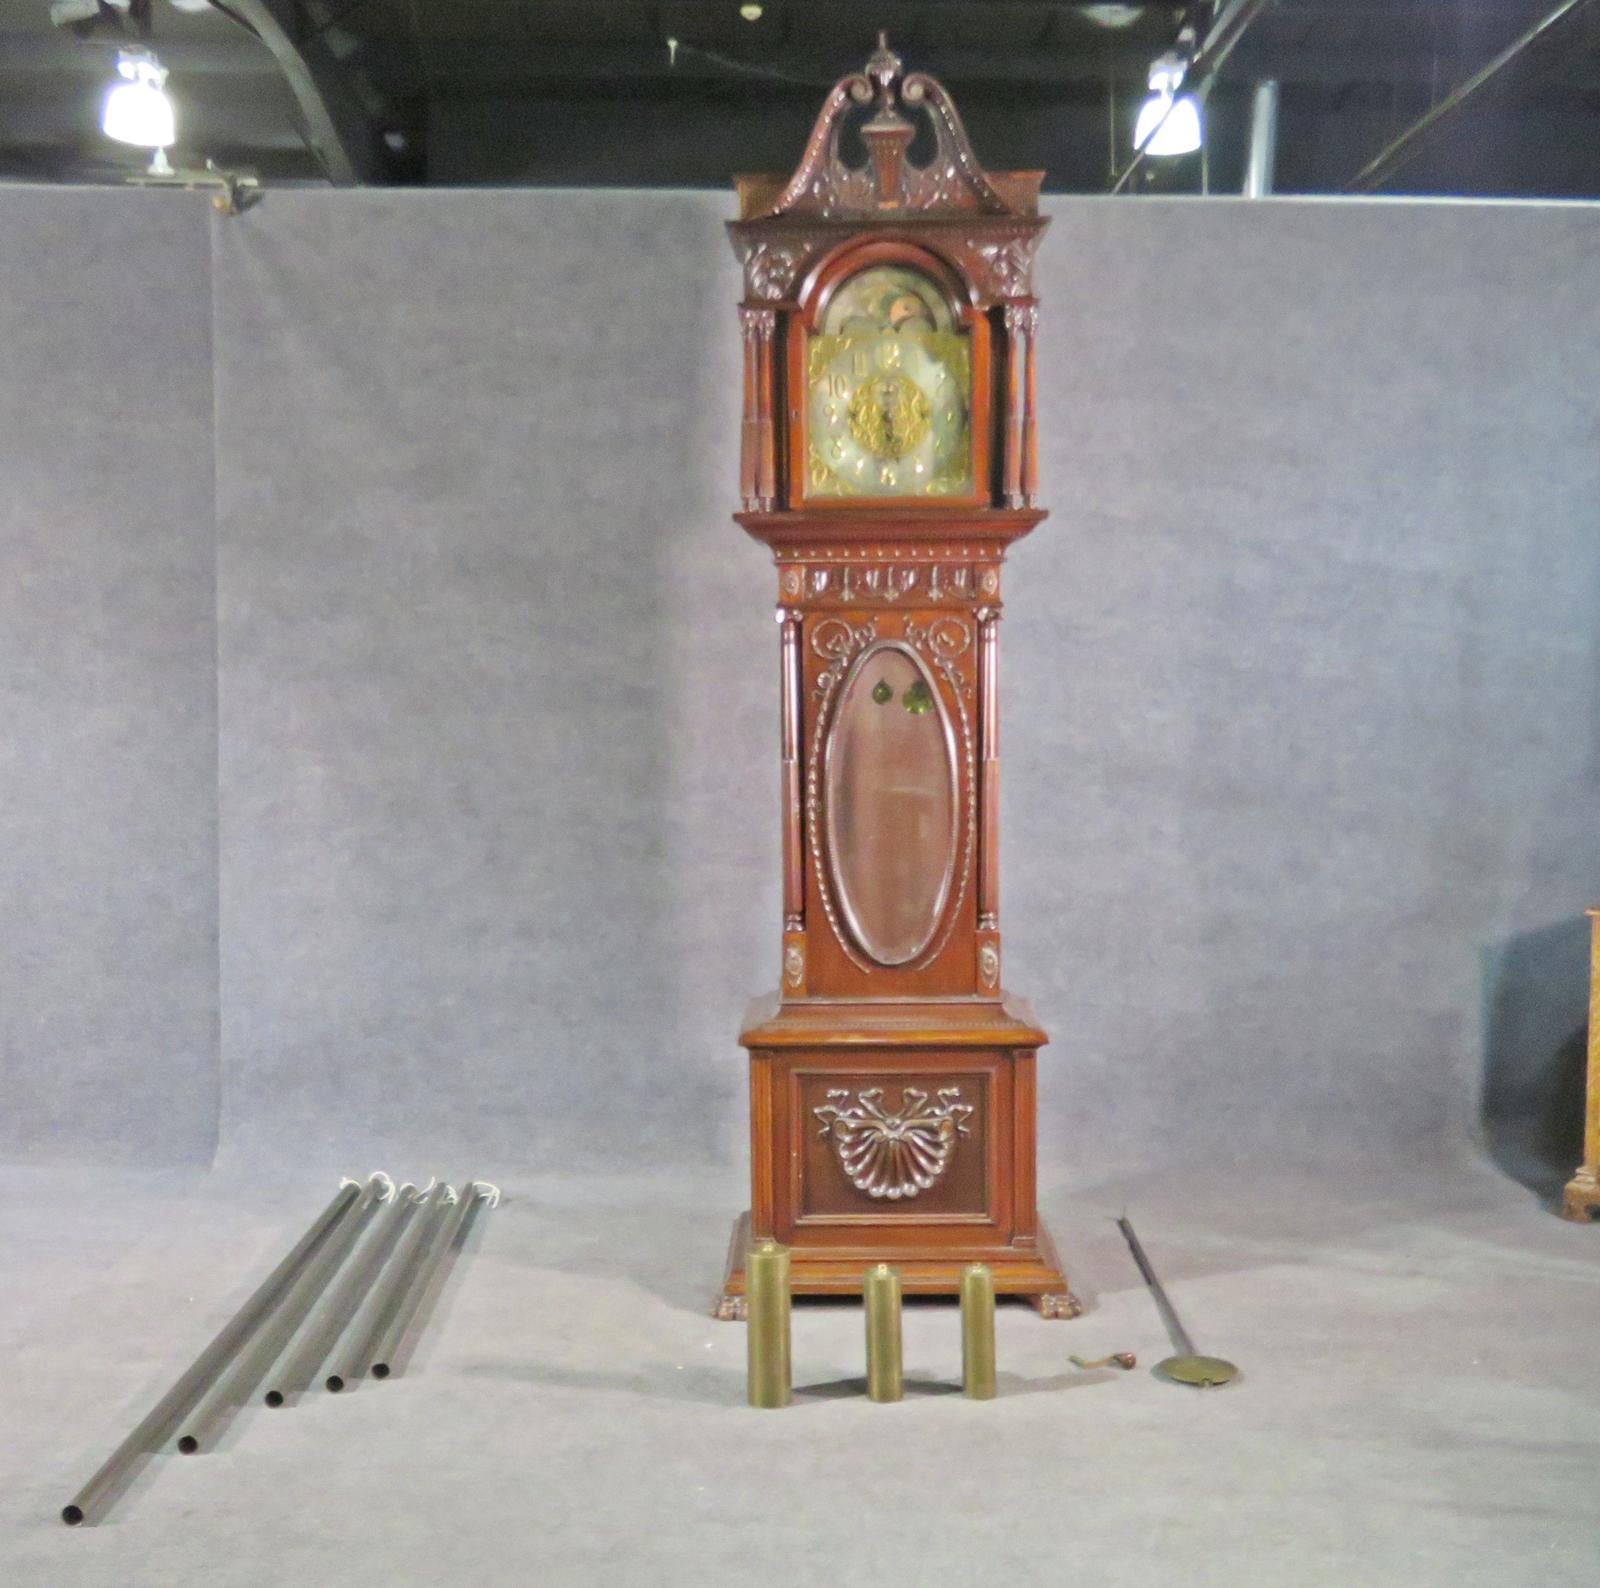 This is a spectacular clock with what I believe is a solid carved walnut Durfee case and and has an Elliot of London movement. The case has some signs of wear and is in it's original condition. The clock is working but will need to be set up by a